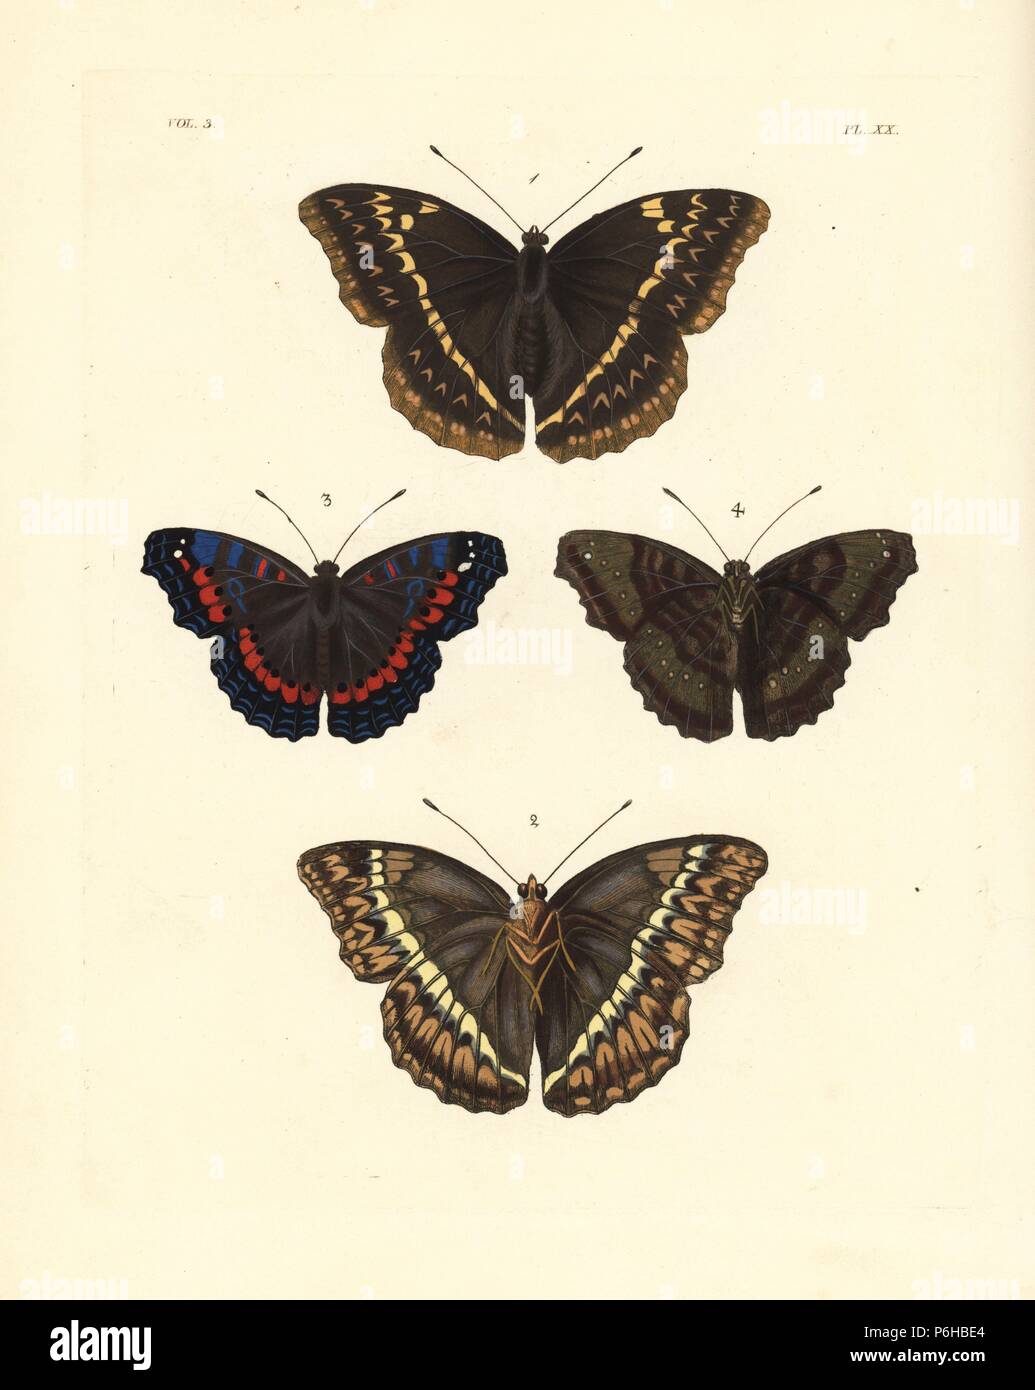 Western glider, Cymothoe althea, Nymphalis althea, under side 1, upper side 2, and gaudy commodore, Precis octavia Vanessa amestris 3,4. Handcoloured lithograph from John O. Westwood's new edition of Dru Drury's 'Illustrations of Exotic Entomology,' Bohn, London, 1837. Stock Photo